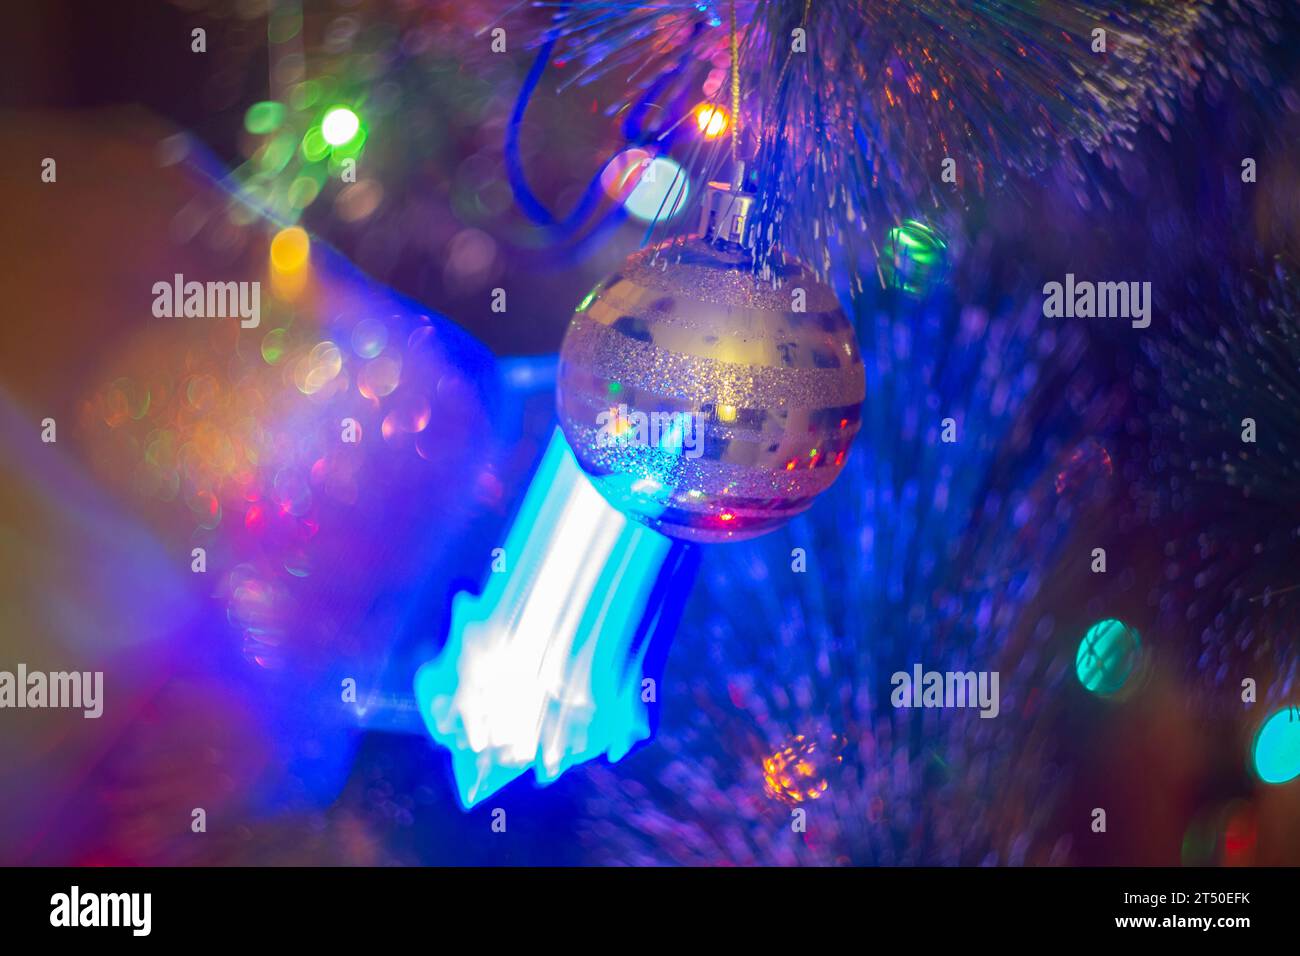 Christmas decorations and colored lights garlands on Christmas tree. Bright lights and highlights against background of Christmas decorations.. Stock Photo